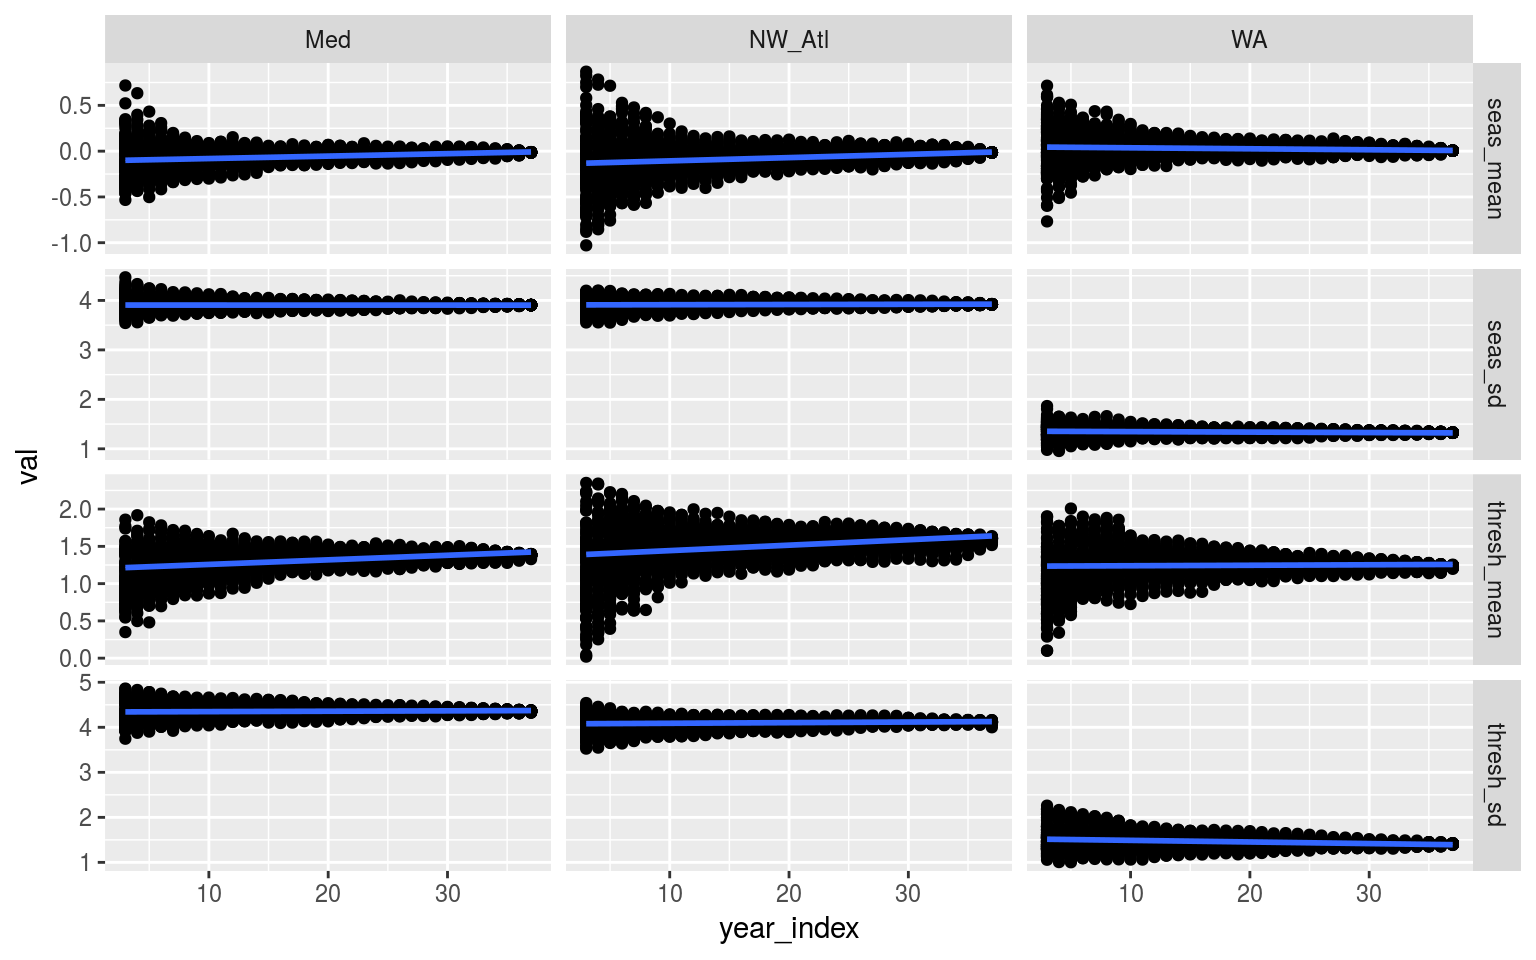 Scatterplot showing the relationship between time series length (x-axis) and a range of metrics (y-axis). The clear pattern is that the variance of the resulting relationships diminishes rapidly after at least 10 years of data are being used to determine the seasonal signal and threshold. The data shown here are all 100 re-samples.